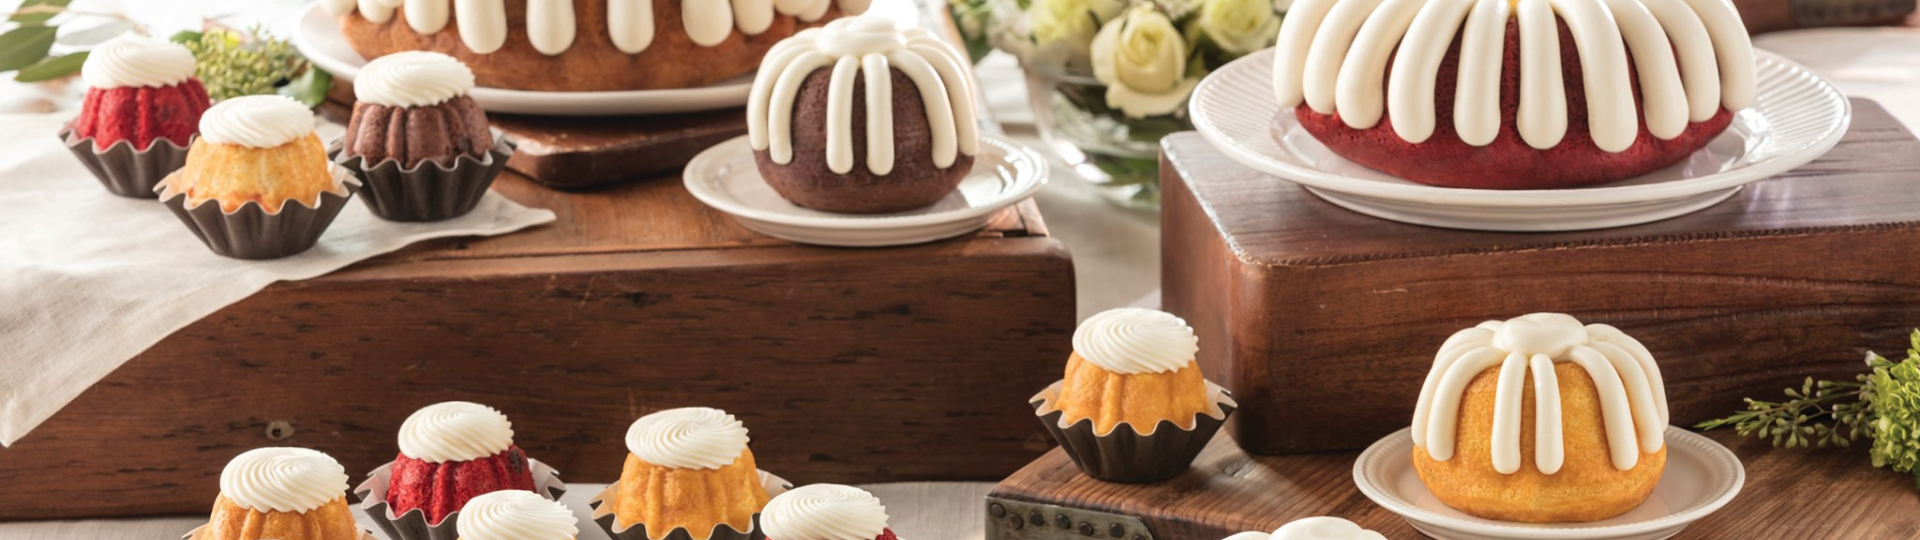 Nothing Bundt Cakes. Large and mini bundt cakes arrange on a table with icing and flower decor.